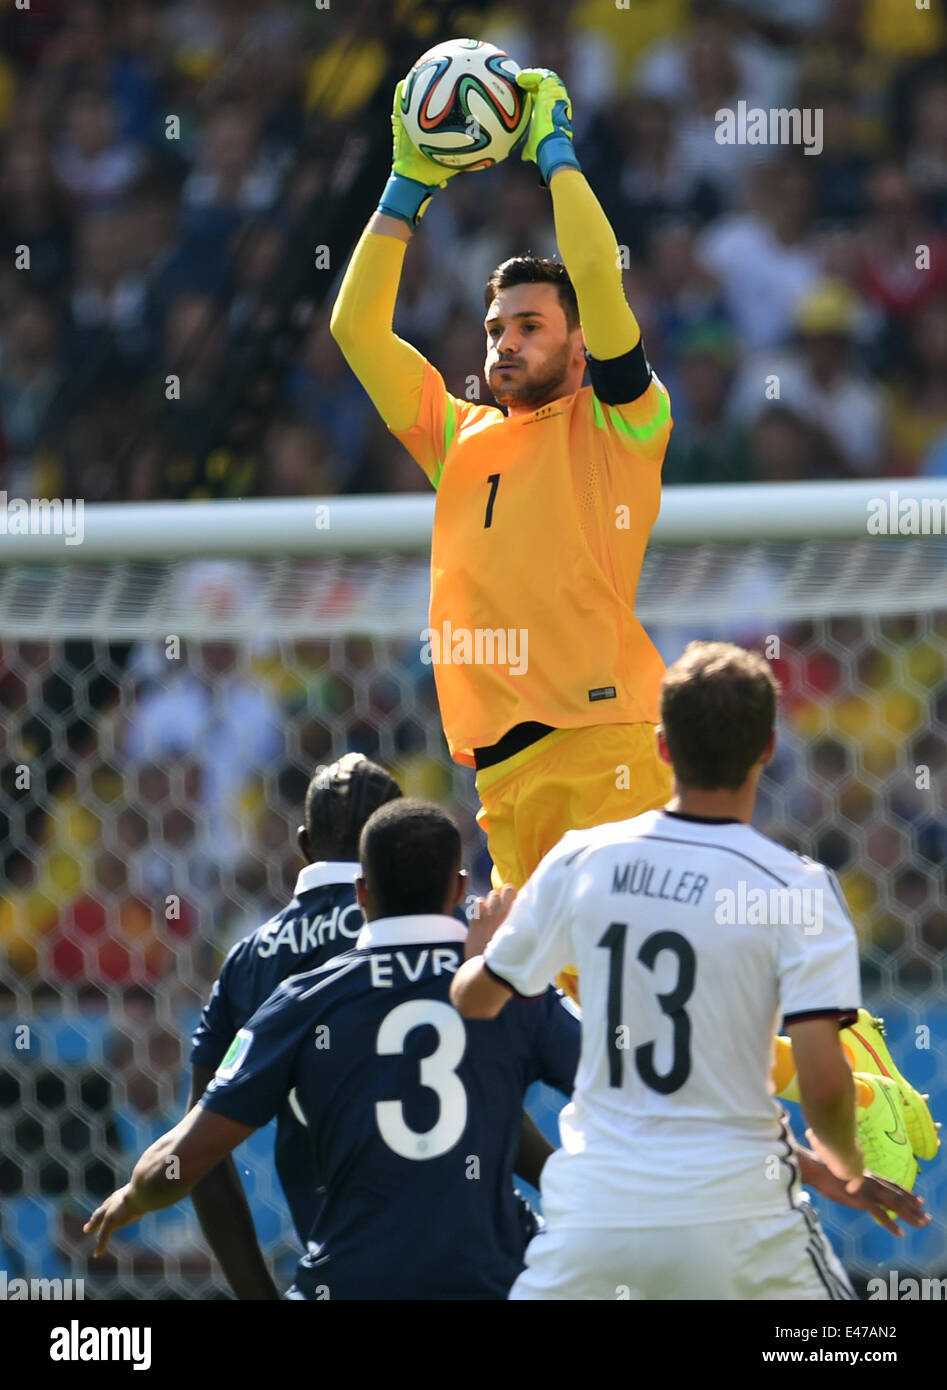 Rio de Janeiro, Brazil. 04th July, 2014. Goalkeeper Hugo Lloris of France (top) catches the ball during the FIFA World Cup 2014 quarter final soccer match between France and Germany at Estadio do Maracana in Rio de Janeiro, Brazil, 04 July 2014. Photo: Andreas Gebert/dpa/Alamy Live News Stock Photo